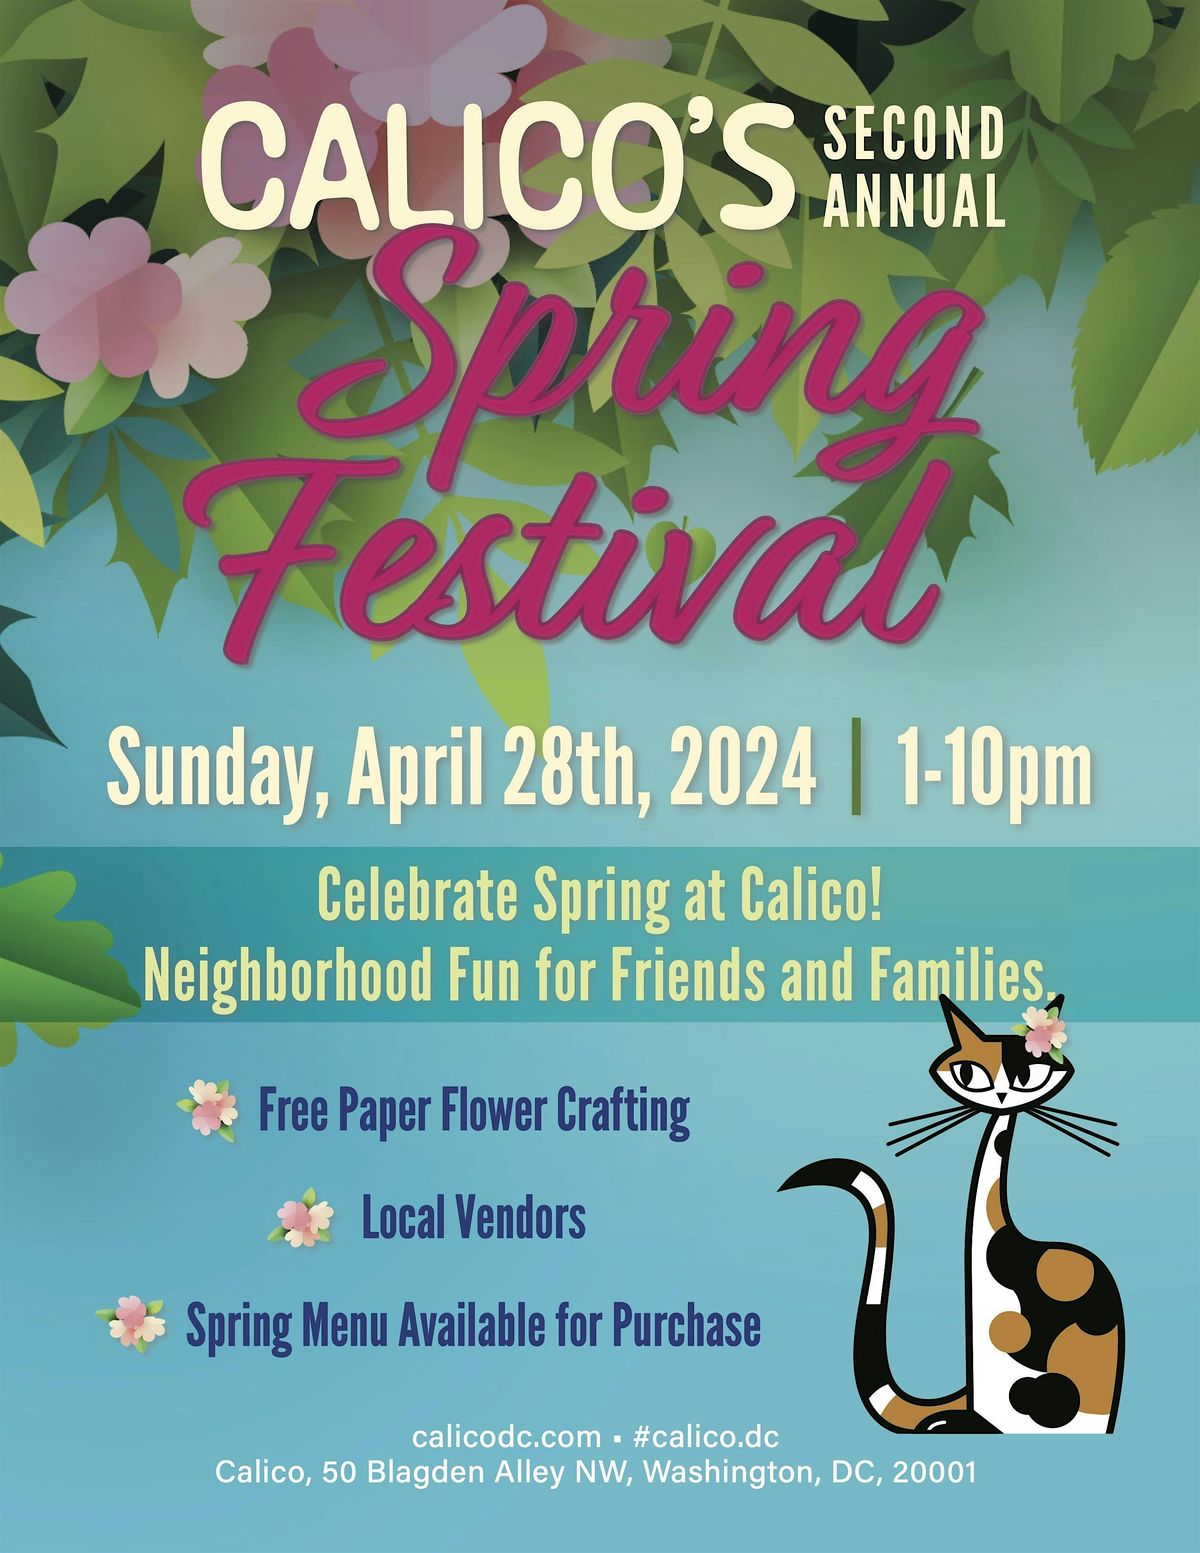 Calico's 2nd Annual Spring Fest